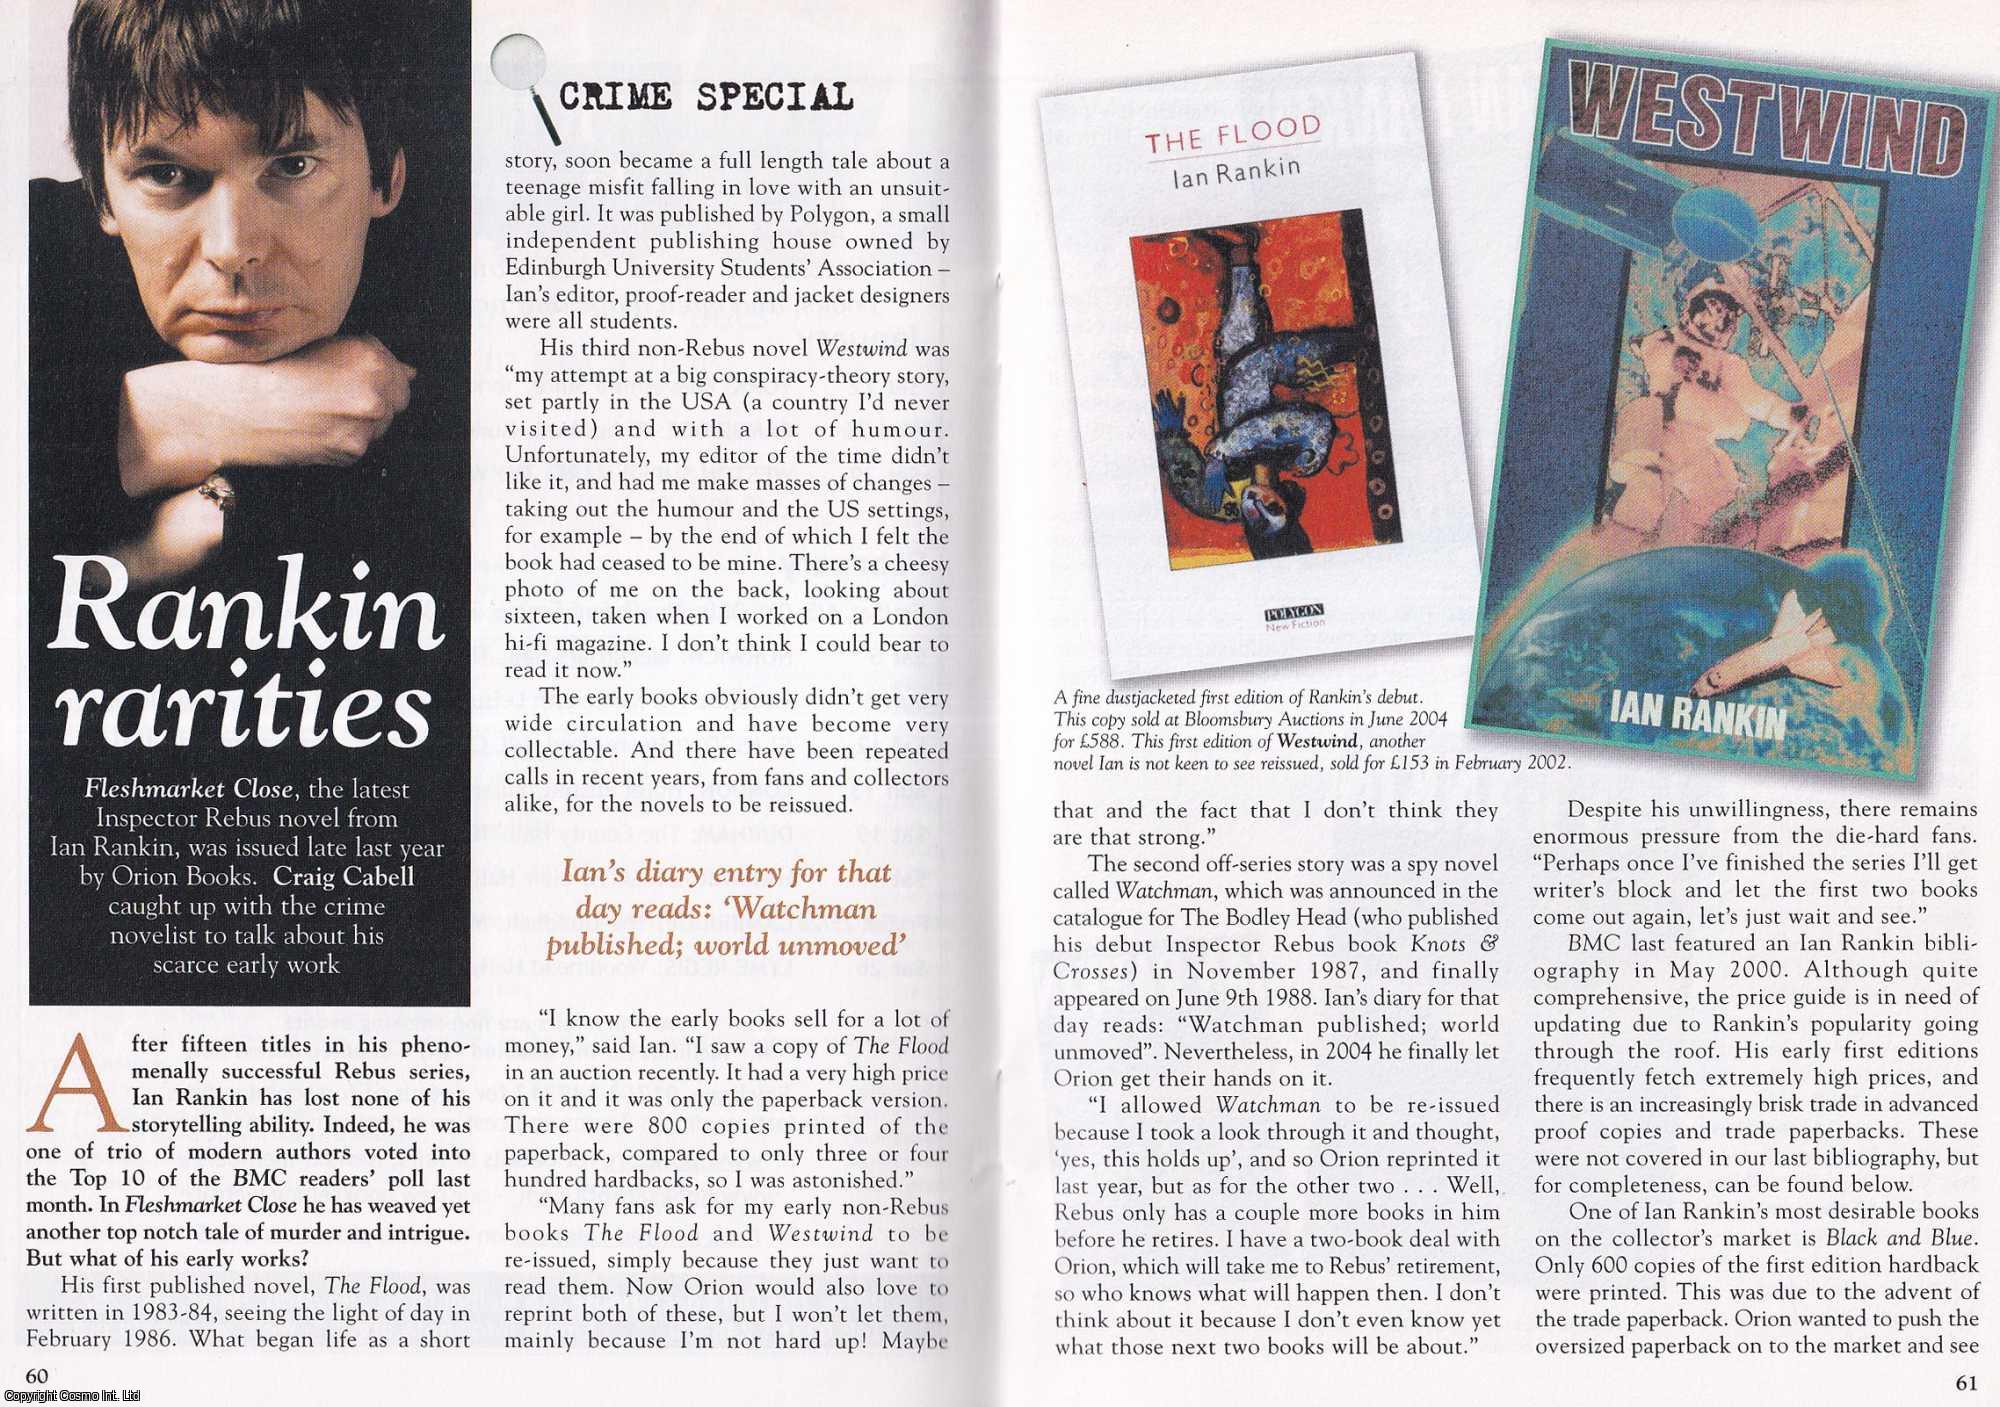 Craig Cabell - Rankin Rarities. Catching up with The Crime Novelist to Talk about His Early Work. This is an original article separated from an issue of The Book & Magazine Collector publication.